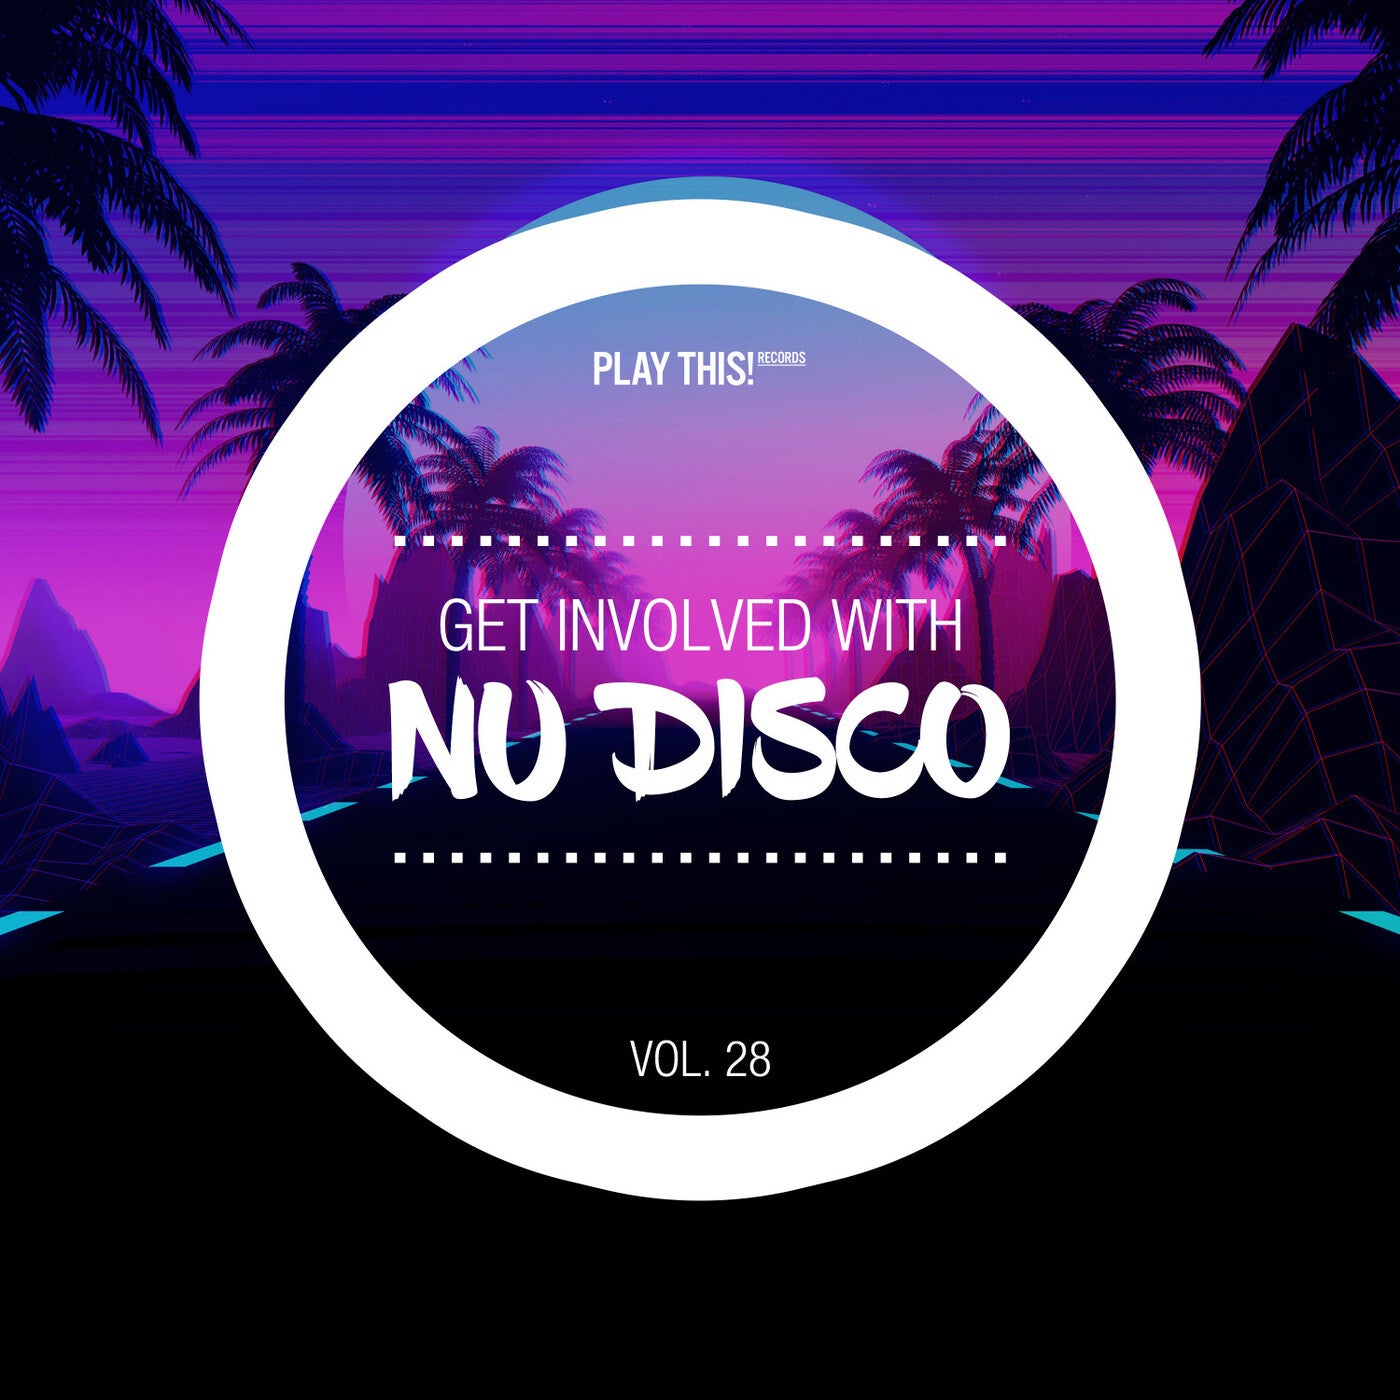 Get Involved With Nu Disco Vol. 28